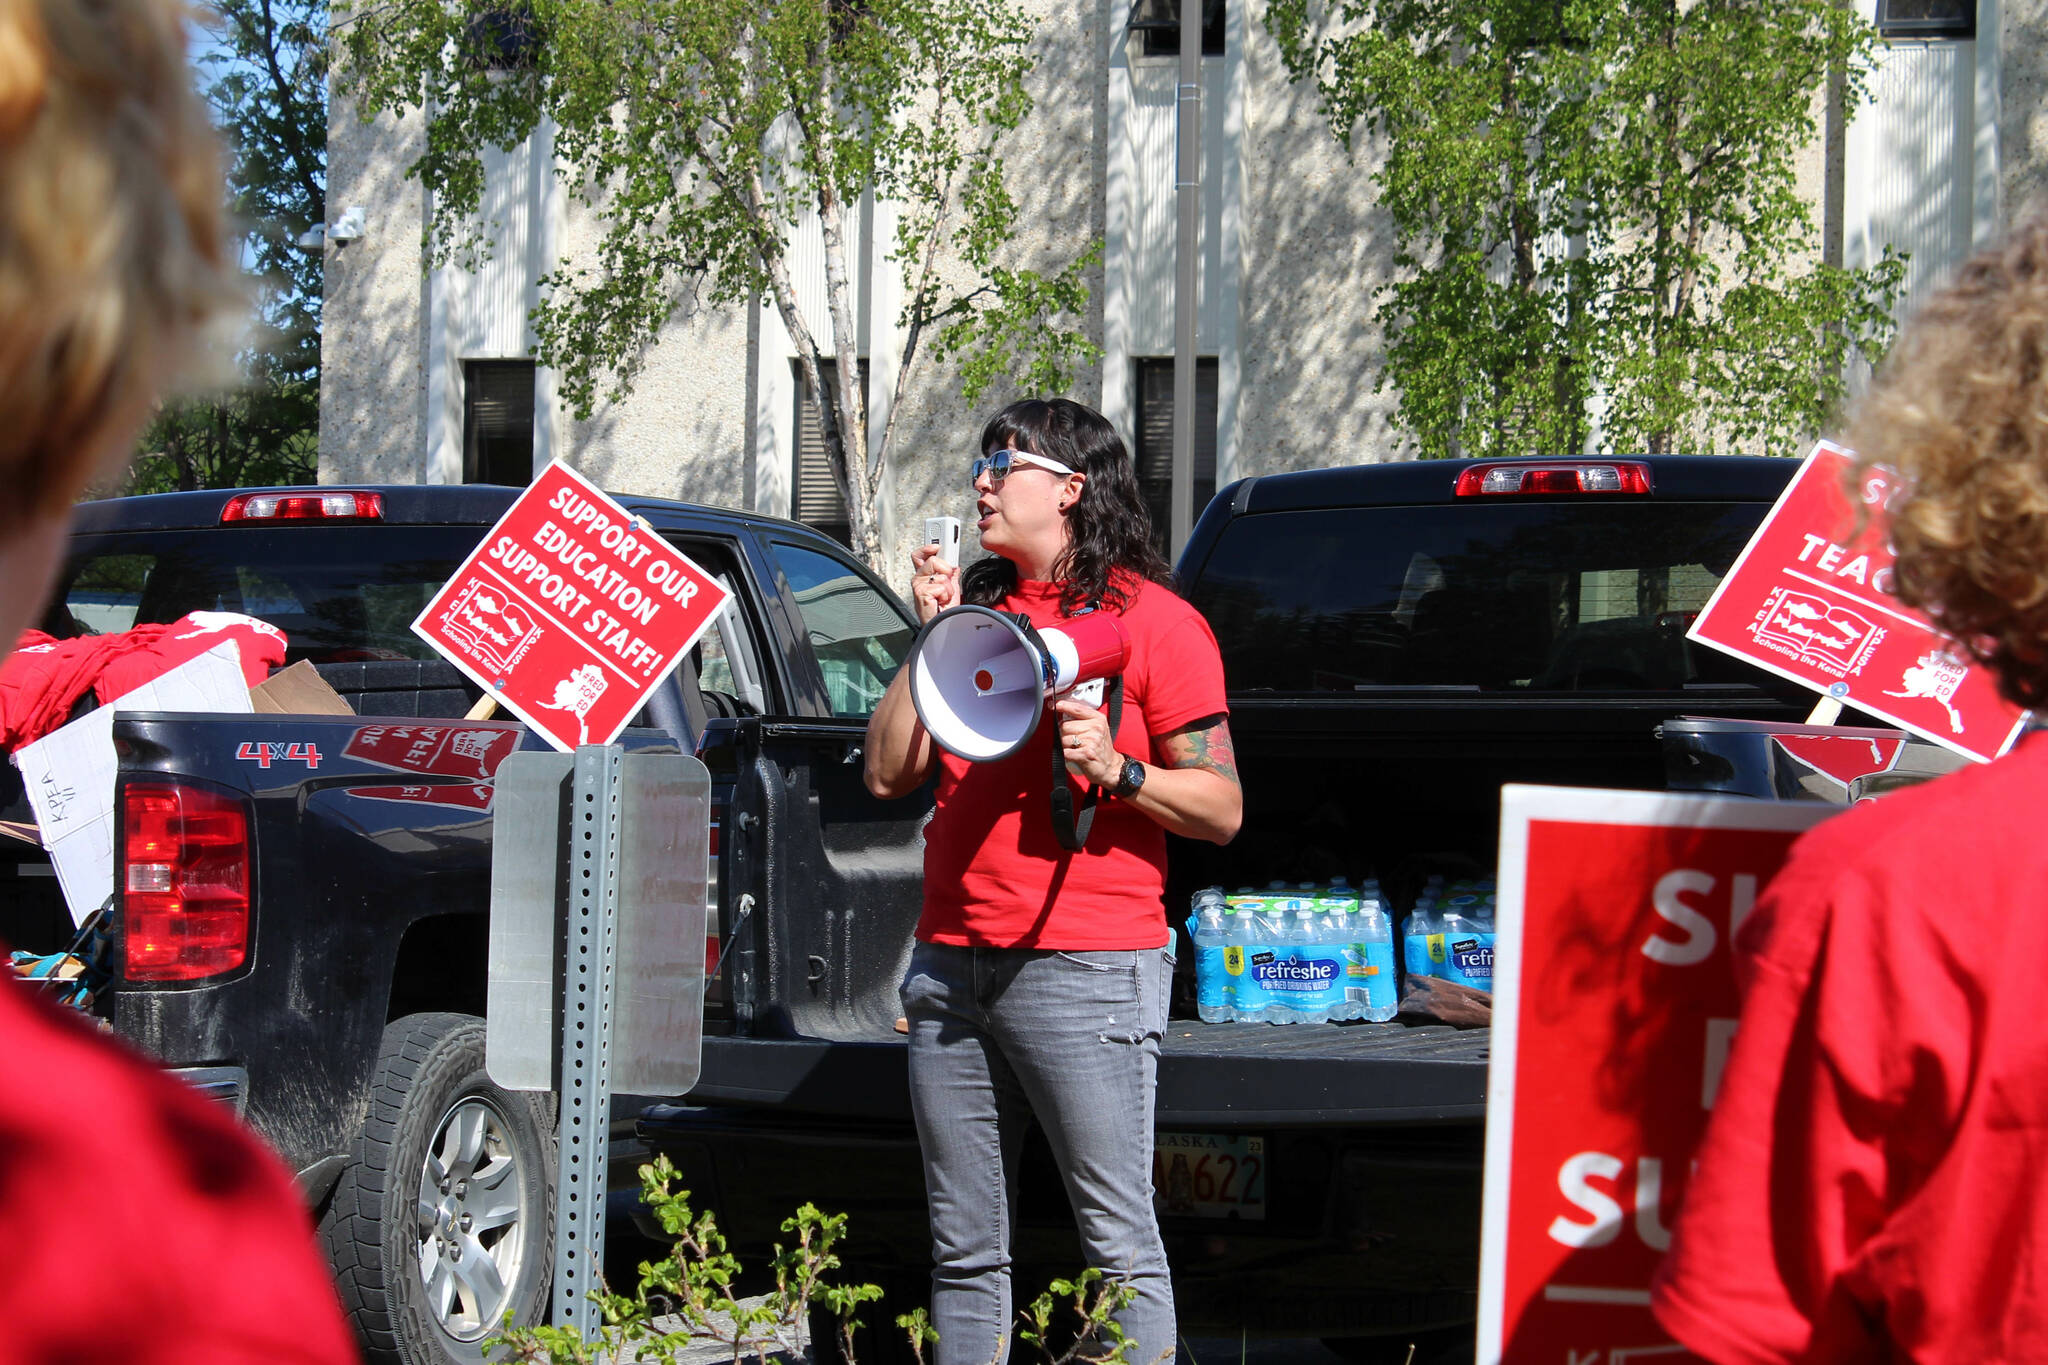 Rebecca Dixon speaks in support of Kenai Peninsula Borough School District teachers and support staff during a rally outside of the George A. Navarre Admin Building on Thursday, May 26, 2022 in Soldotna, Alaska. (Ashlyn O’Hara/Peninsula Clarion)